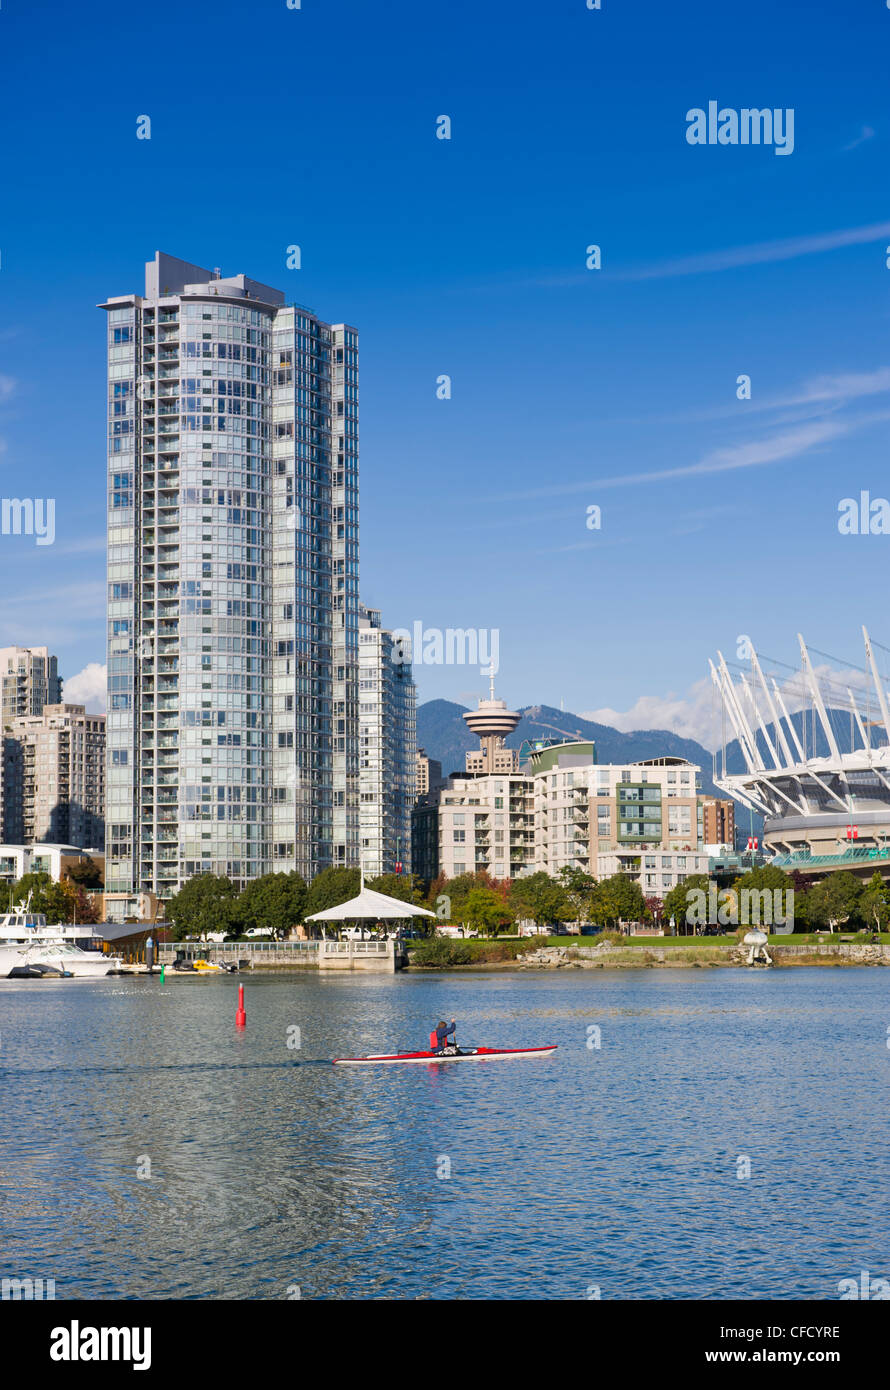 Kayaker, City skyline with new retractable roof on BC Place Stadium, False Creek, Vancouver, British Columbia, Canada Stock Photo